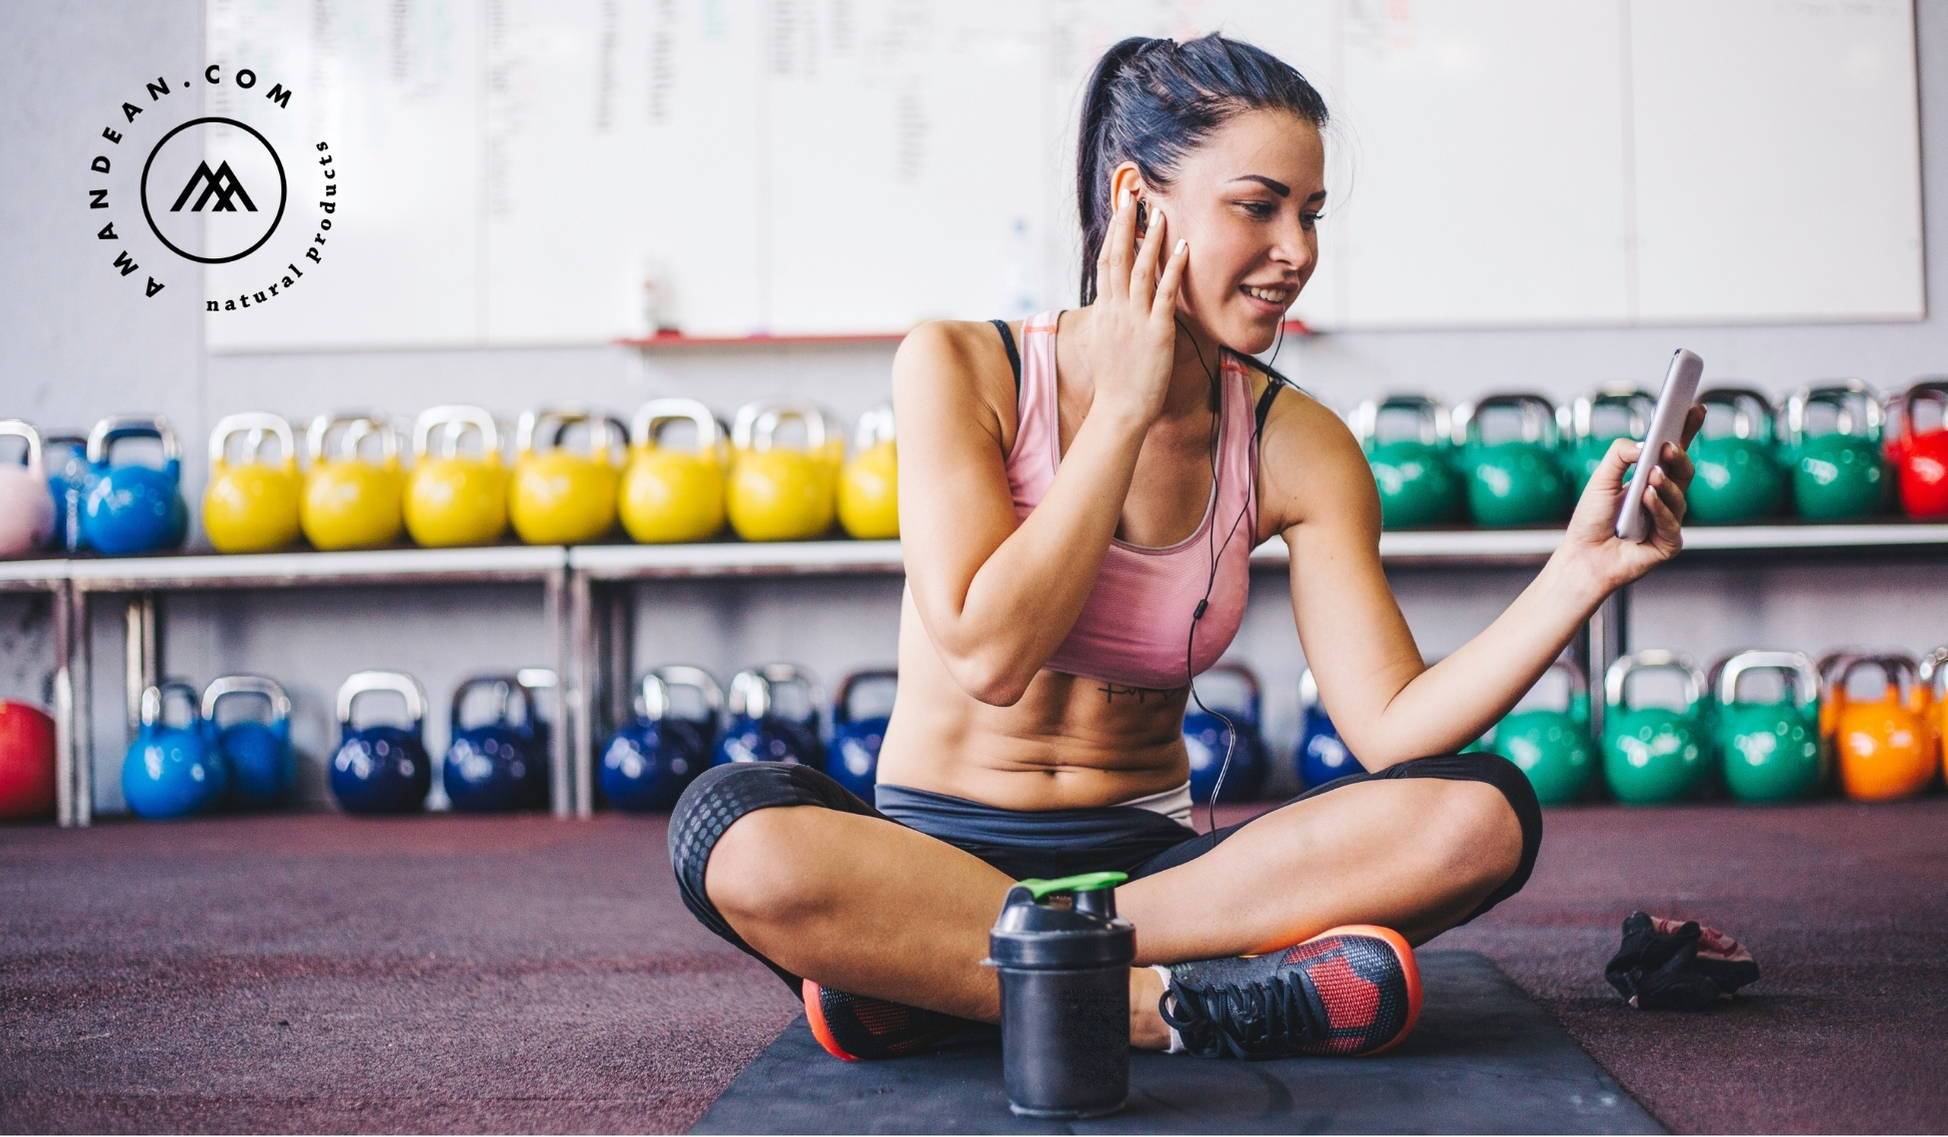 Podcasts & Playlists For Your Next Workout